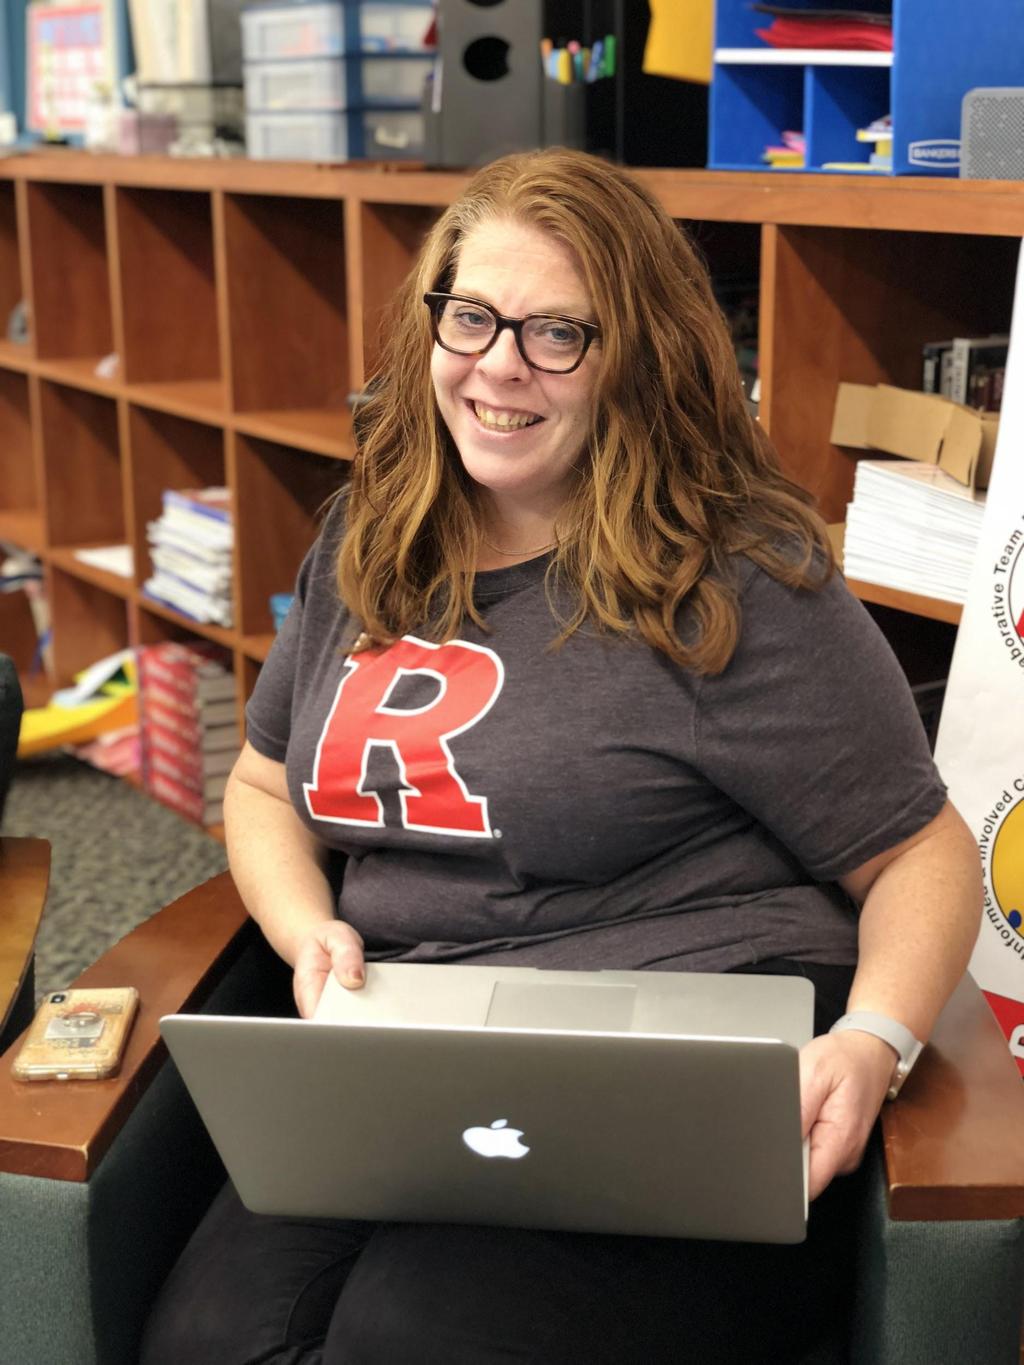 Teacher of the Month Robbinsville Recognizing Outstanding Teachers Congratulations to Ms. Manning on being voted October Teacher of the Month! Ms. Manning was previously a teacher at Pond Road Middle School before moving to the high school.